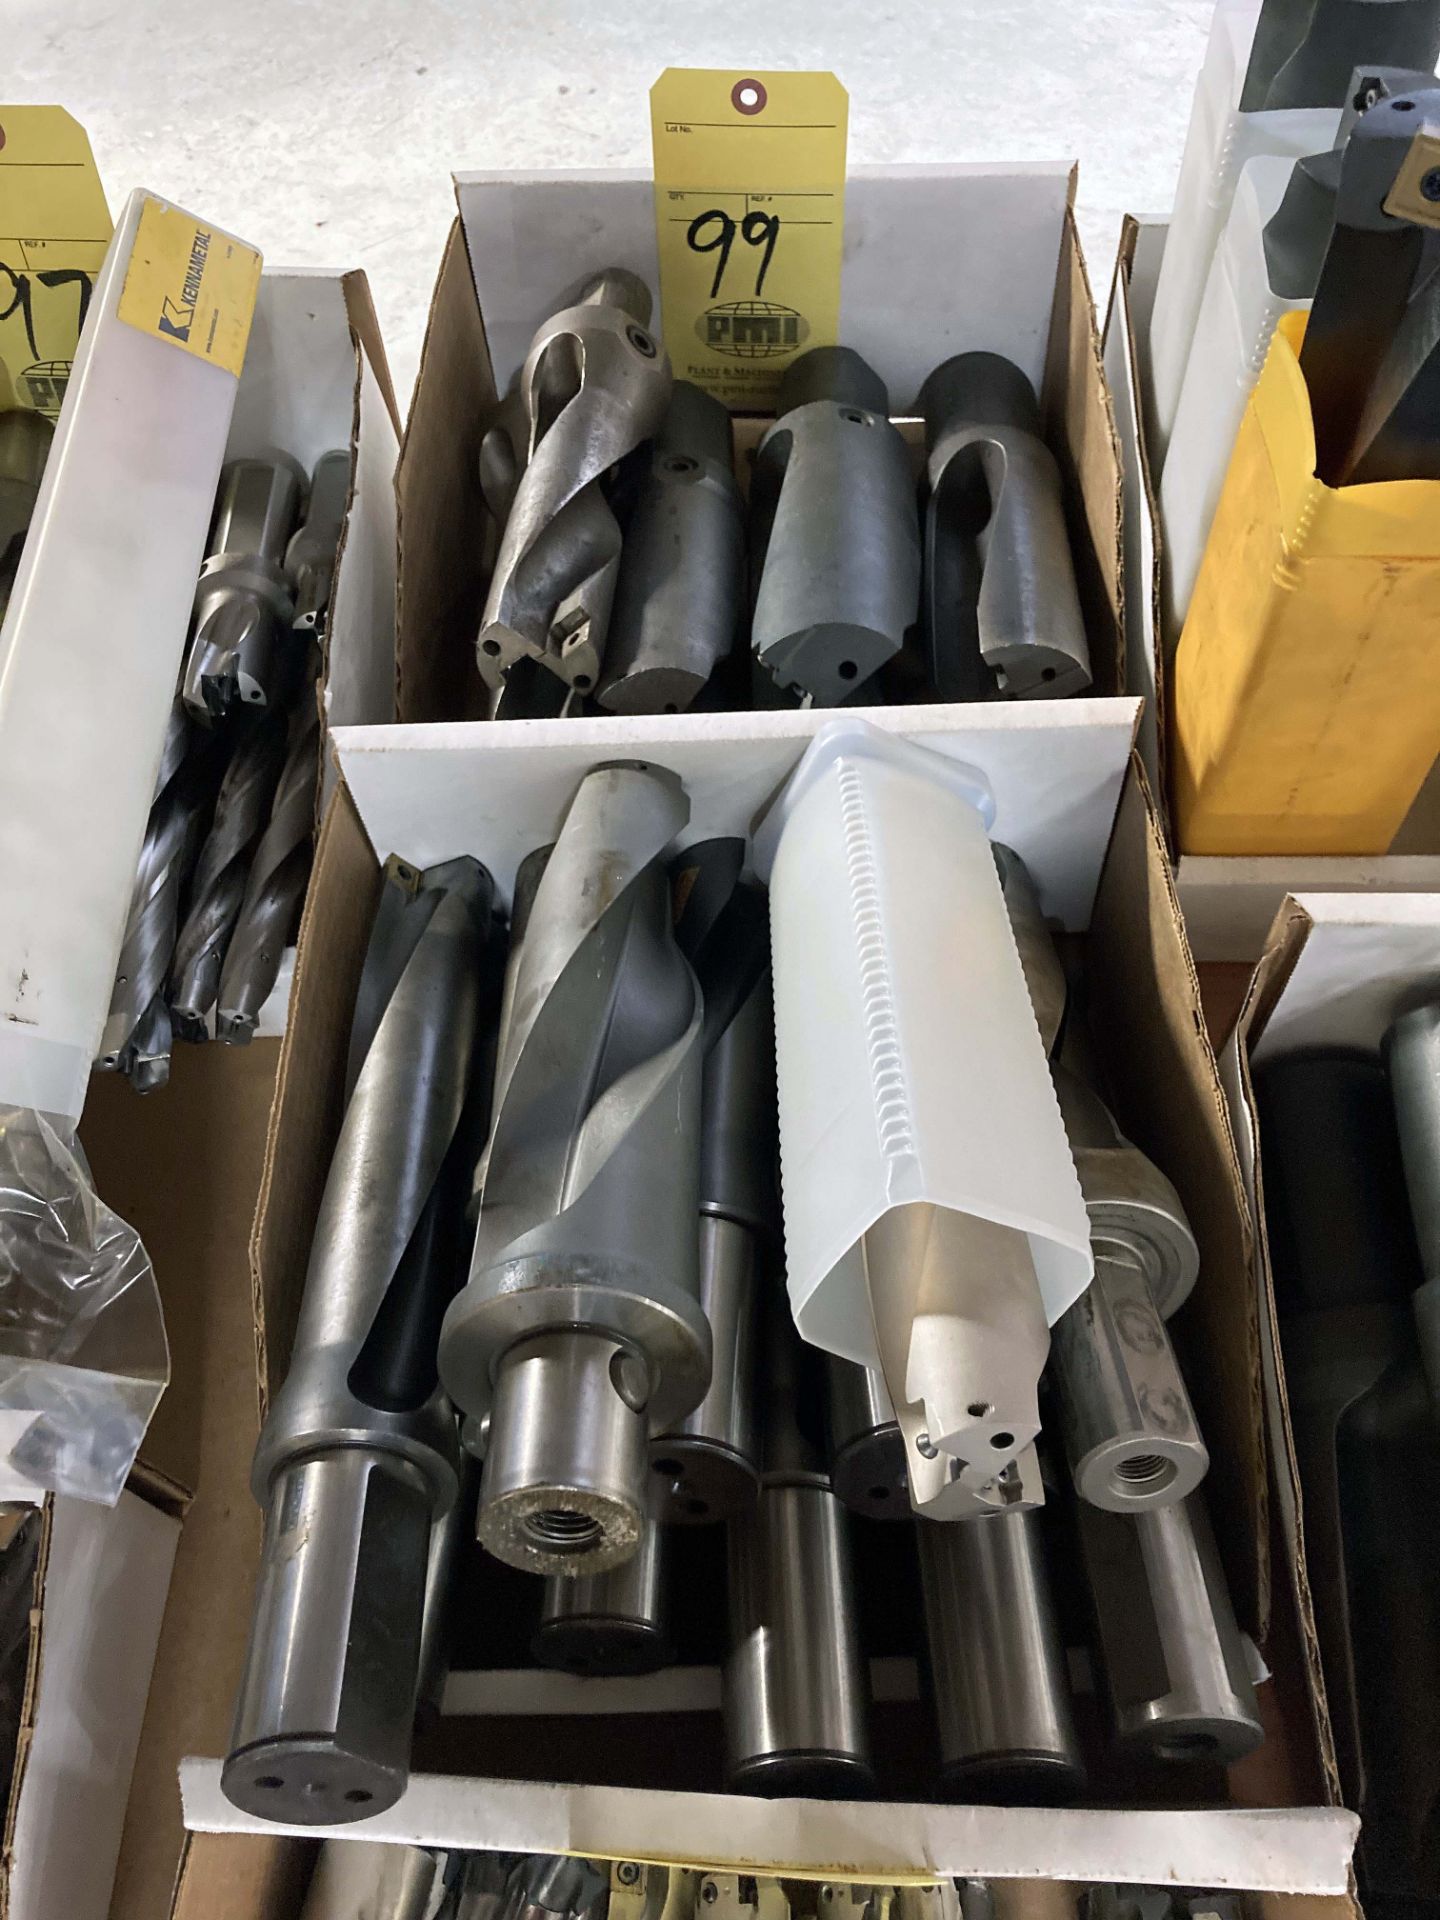 LOT OF THROUGH COOLANT TWIST DRILLS (Located at: AF Global/Ameriforge R&D Facility, 13770 Industrial